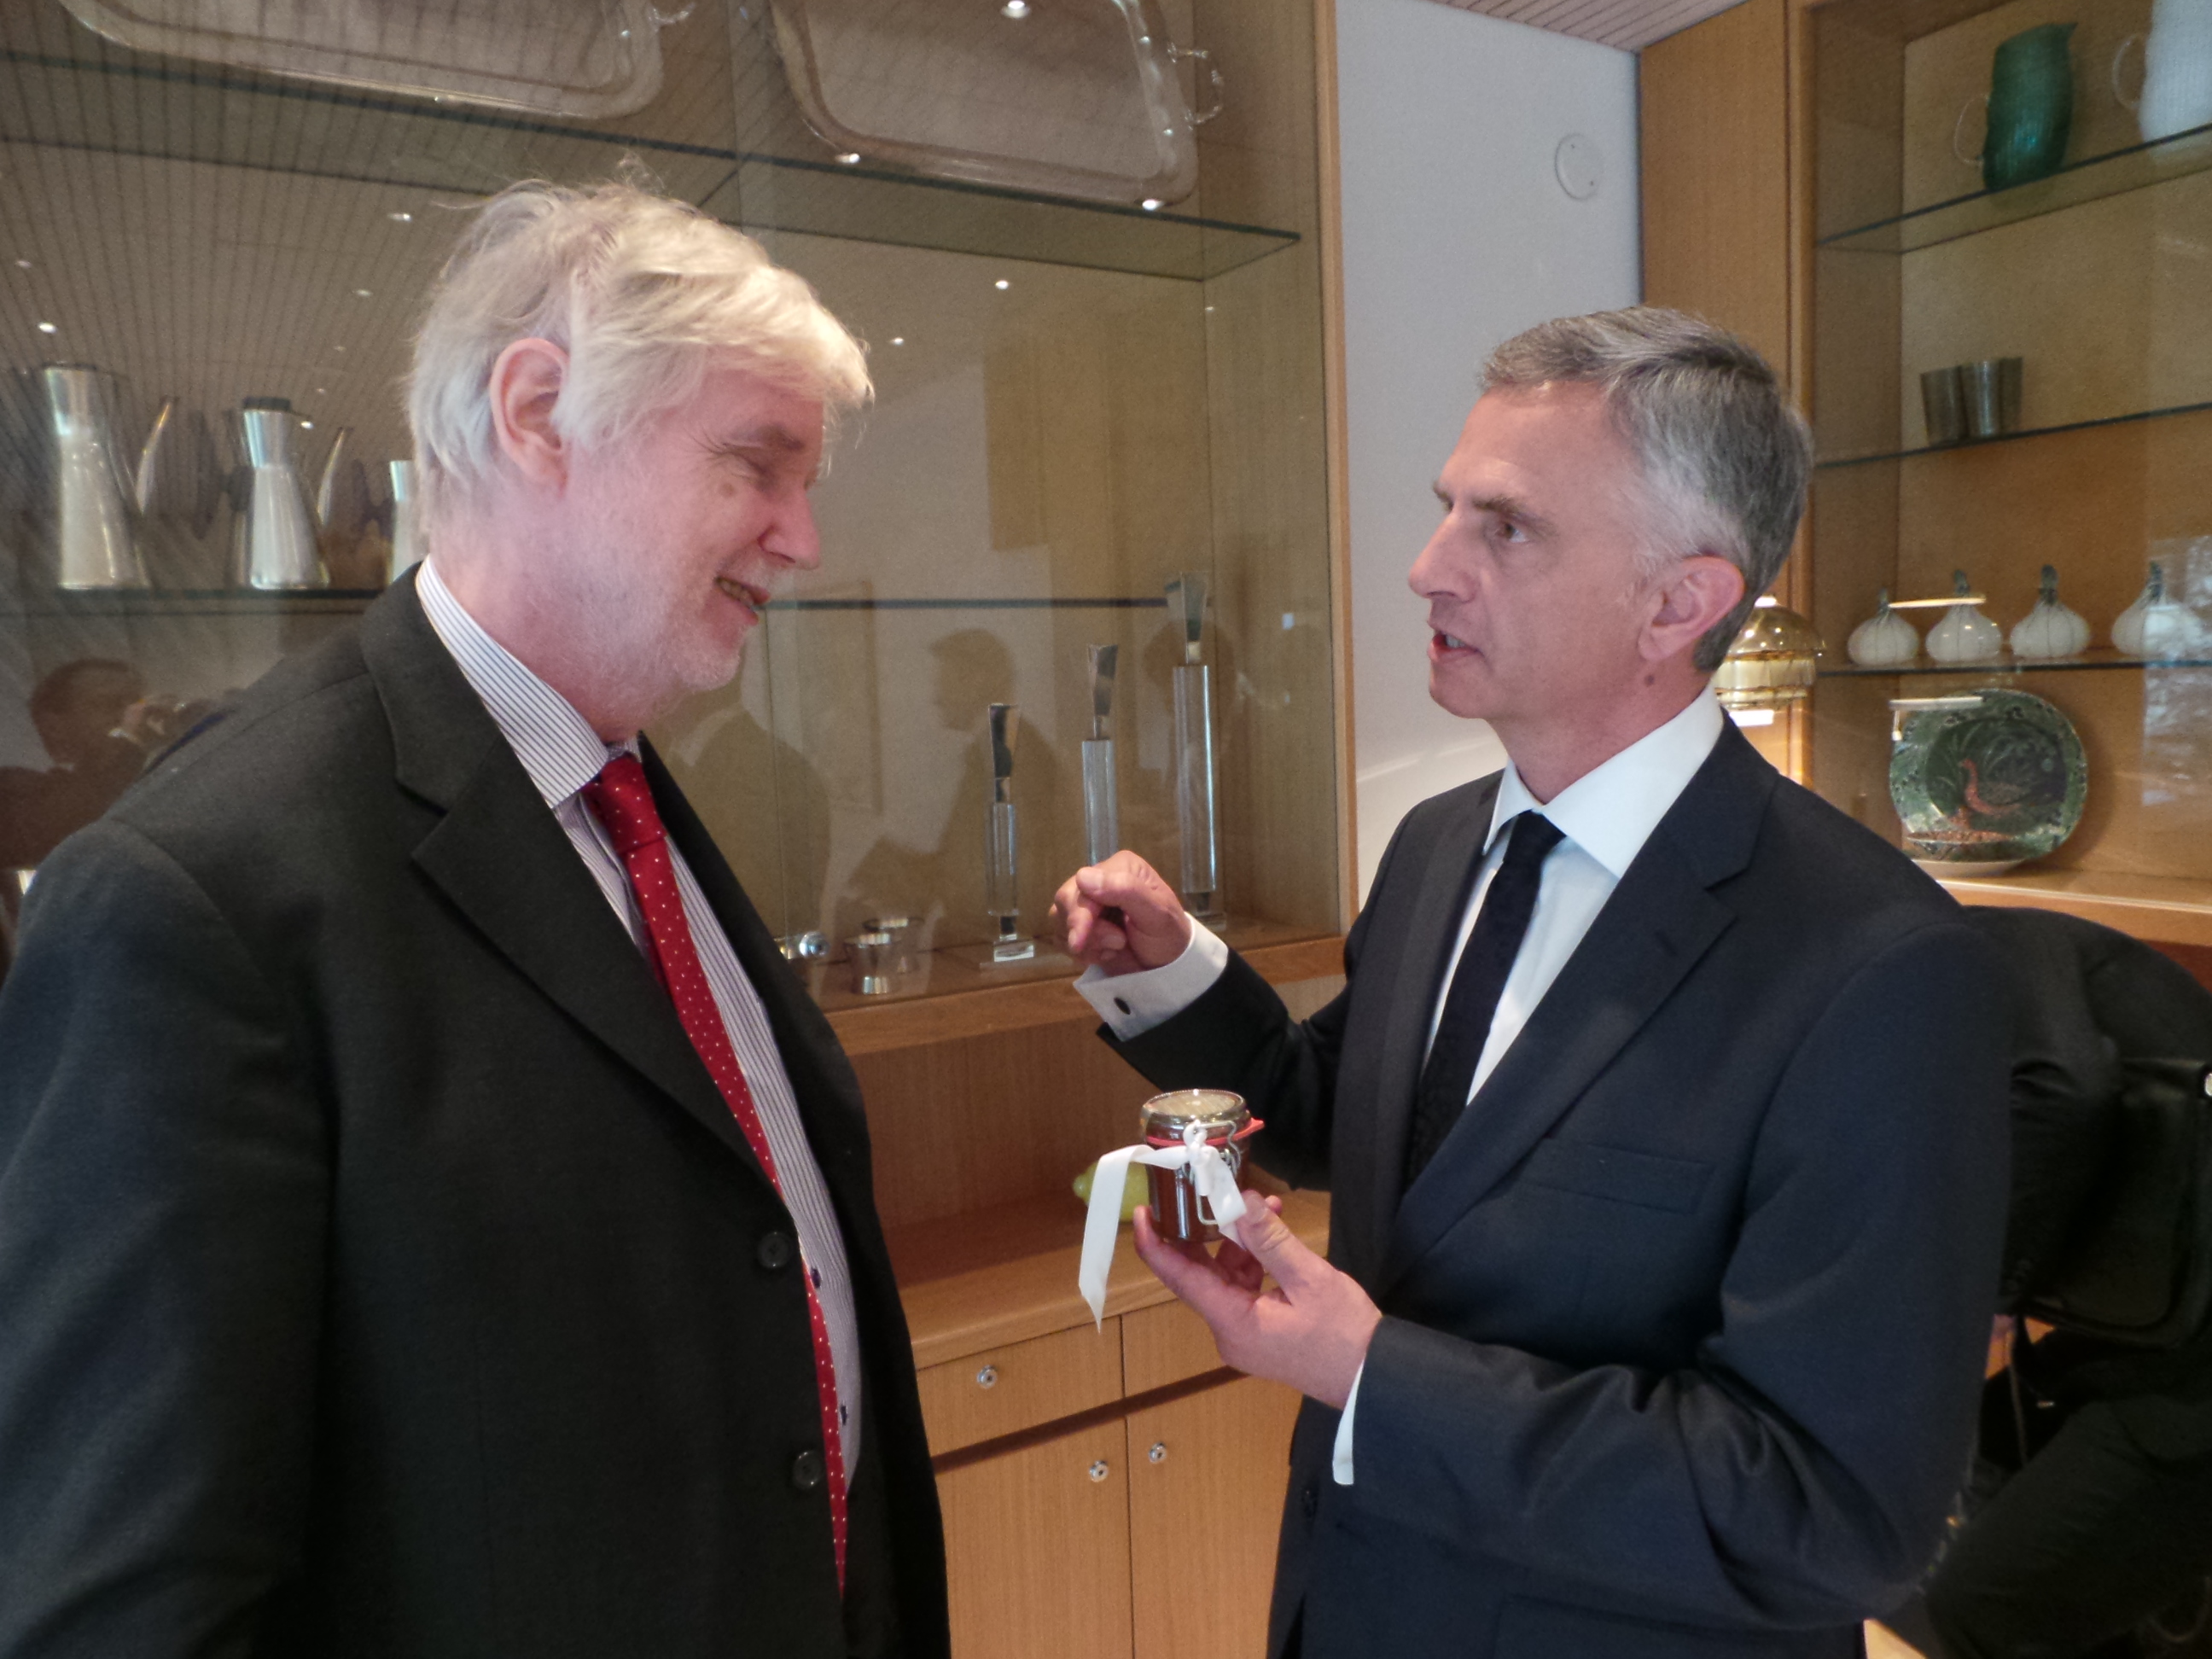 President of the Confederation Didier Burkhalter in discussion with Finnish Minister of Foreign Affairs Erkki Tuomioja.